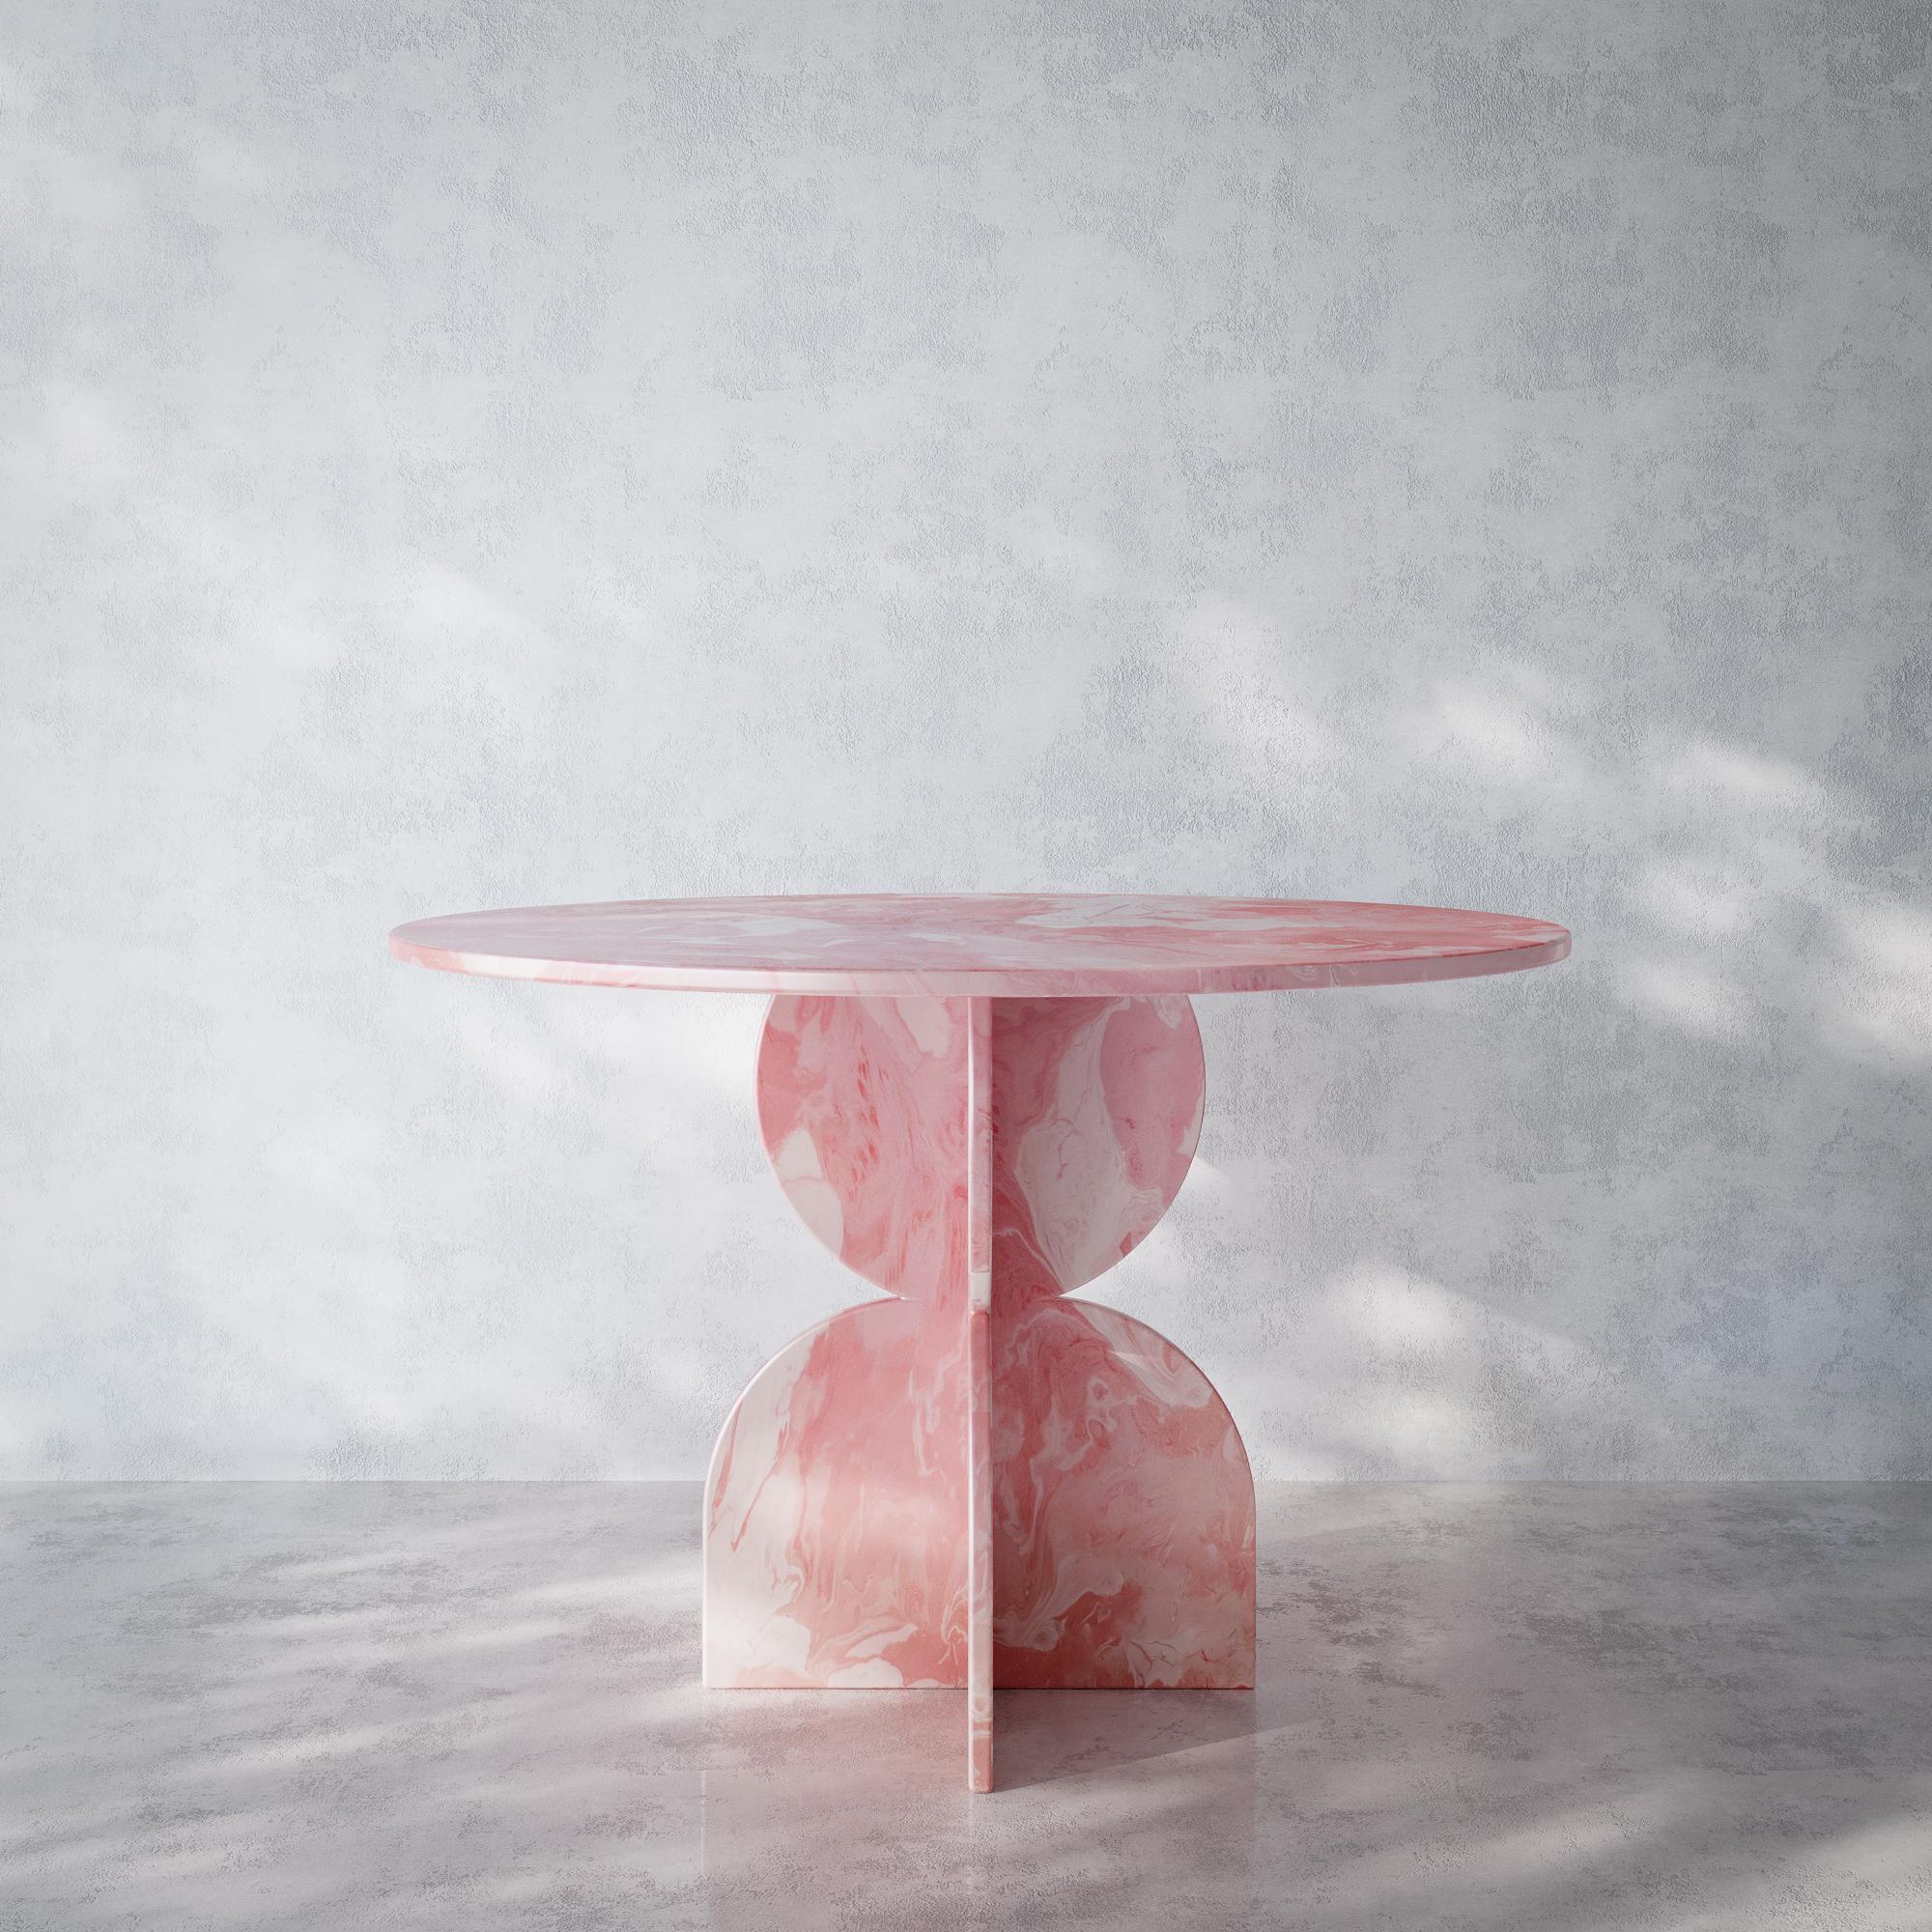 Modern Contemporary Pink Round Table Hand-Crafted 100% Recycled Plastic by Anqa Studios For Sale